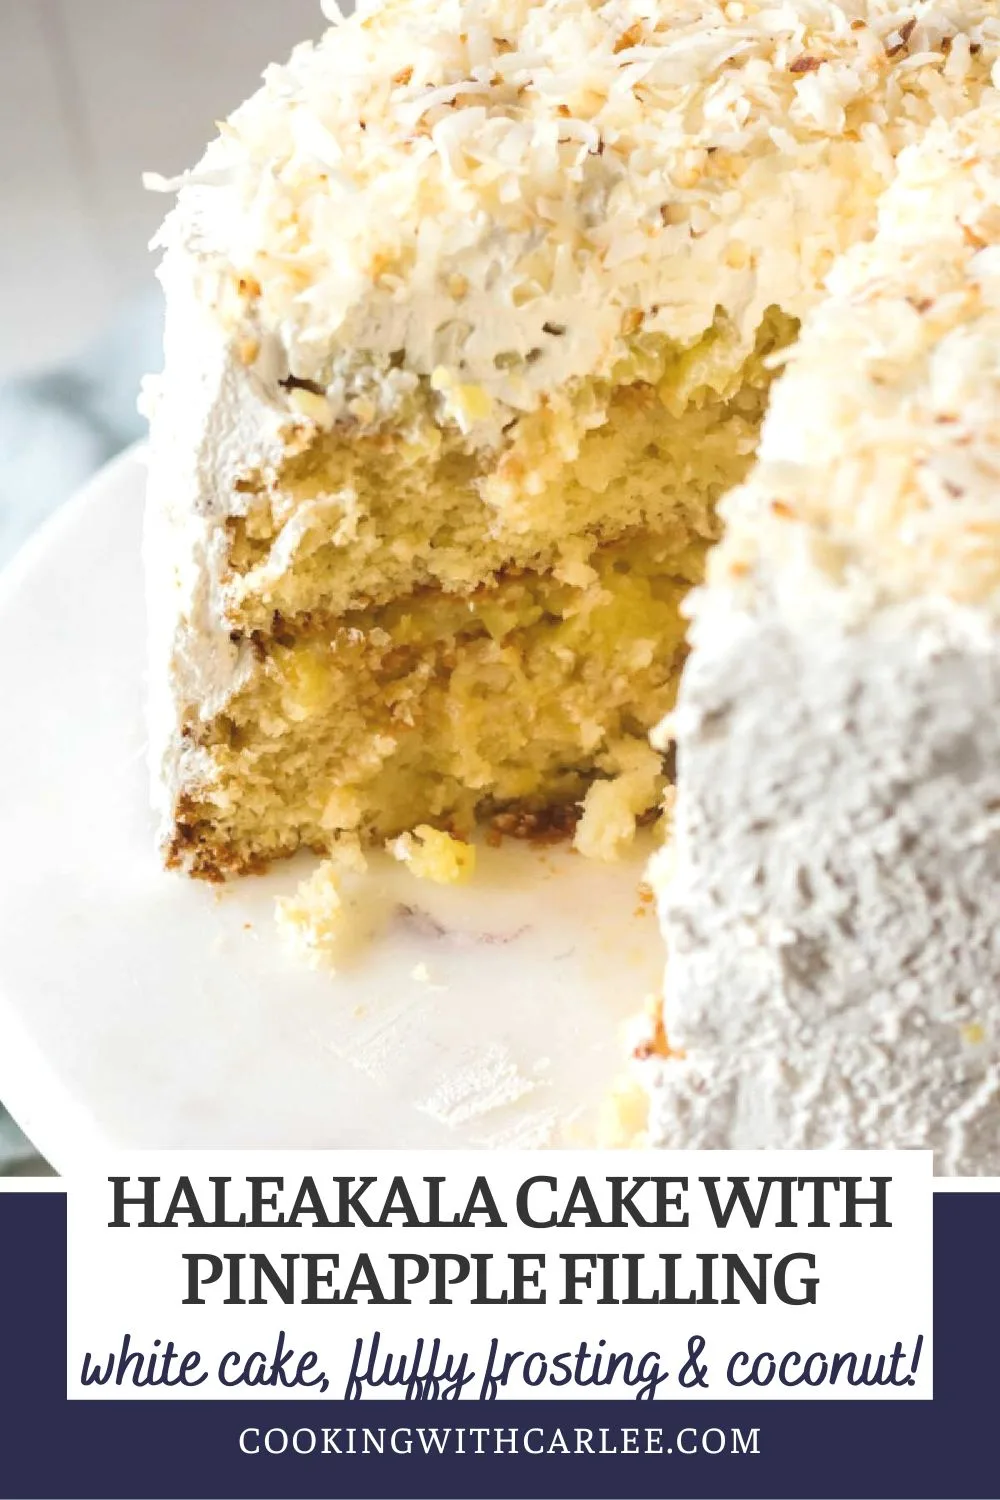 This Haleakala cake is so good. Two layers of soft white cake, a TON of pineapple filling and a white fluffy cloud of frosting. A little toasted coconut on top helps transport you to the tropics. It is a winner of a cake that will be requested time and again!